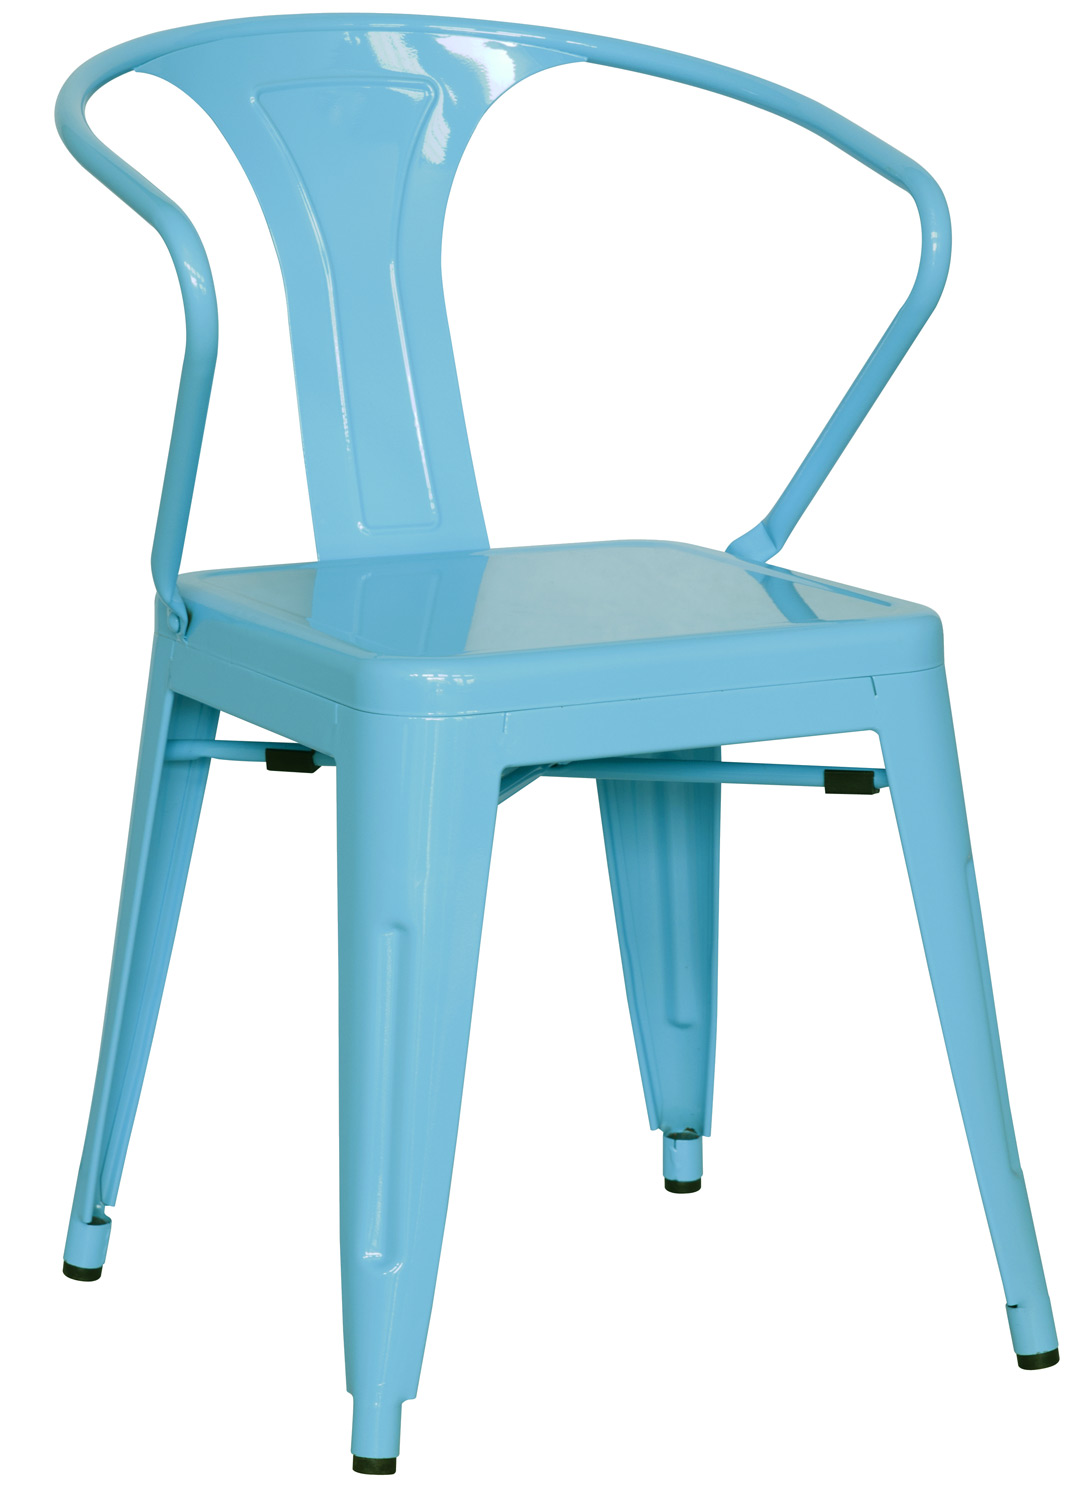 Chintaly Imports 8023 Galvanized Steel Side Chair - Sky Blue